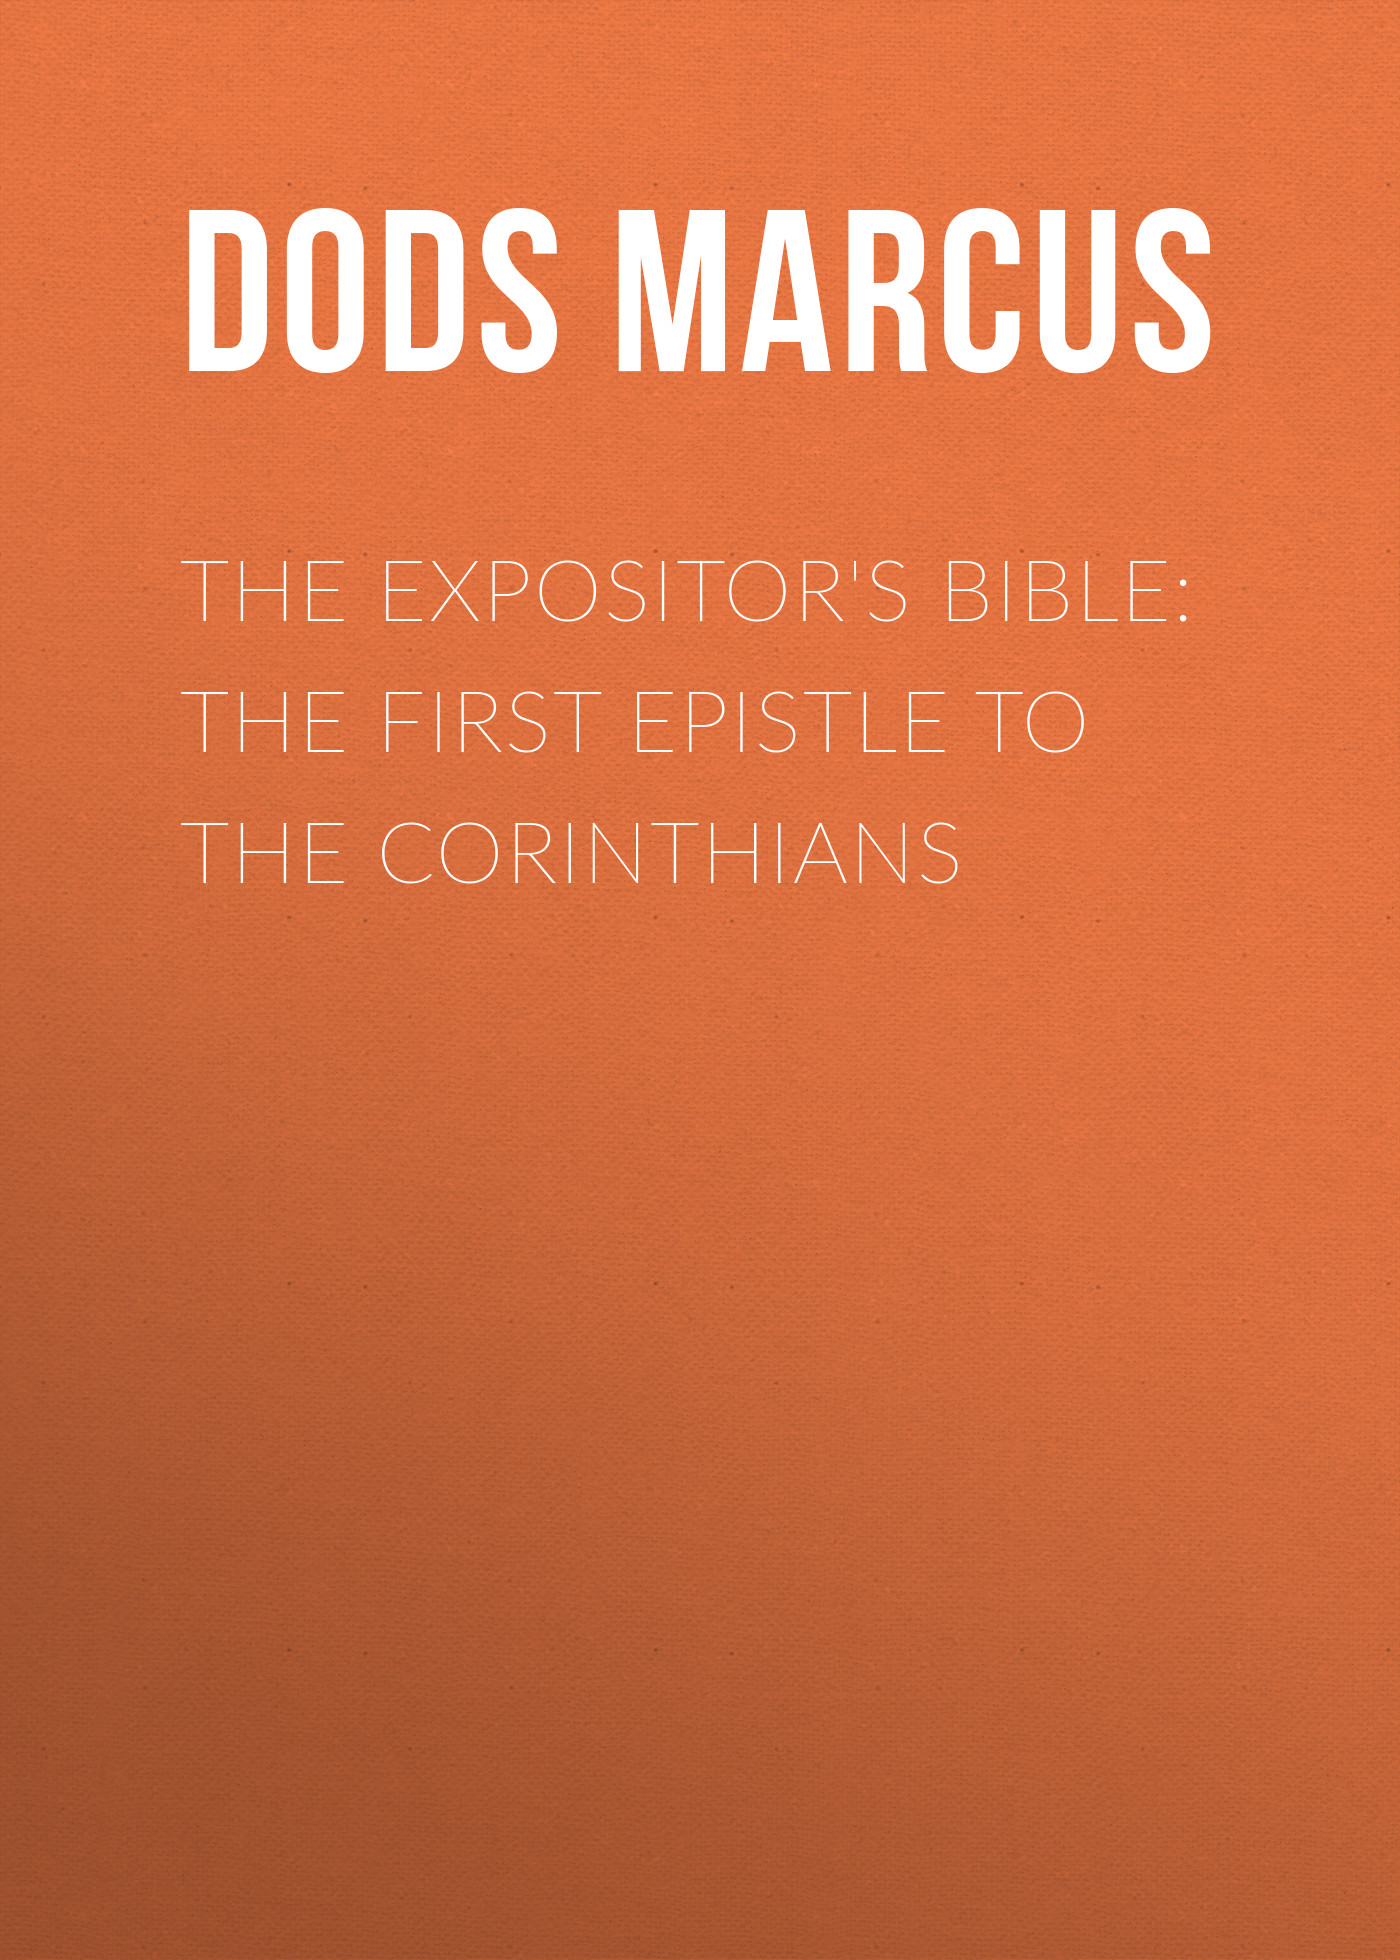 The Expositor's Bible: The First Epistle to the Corinthians